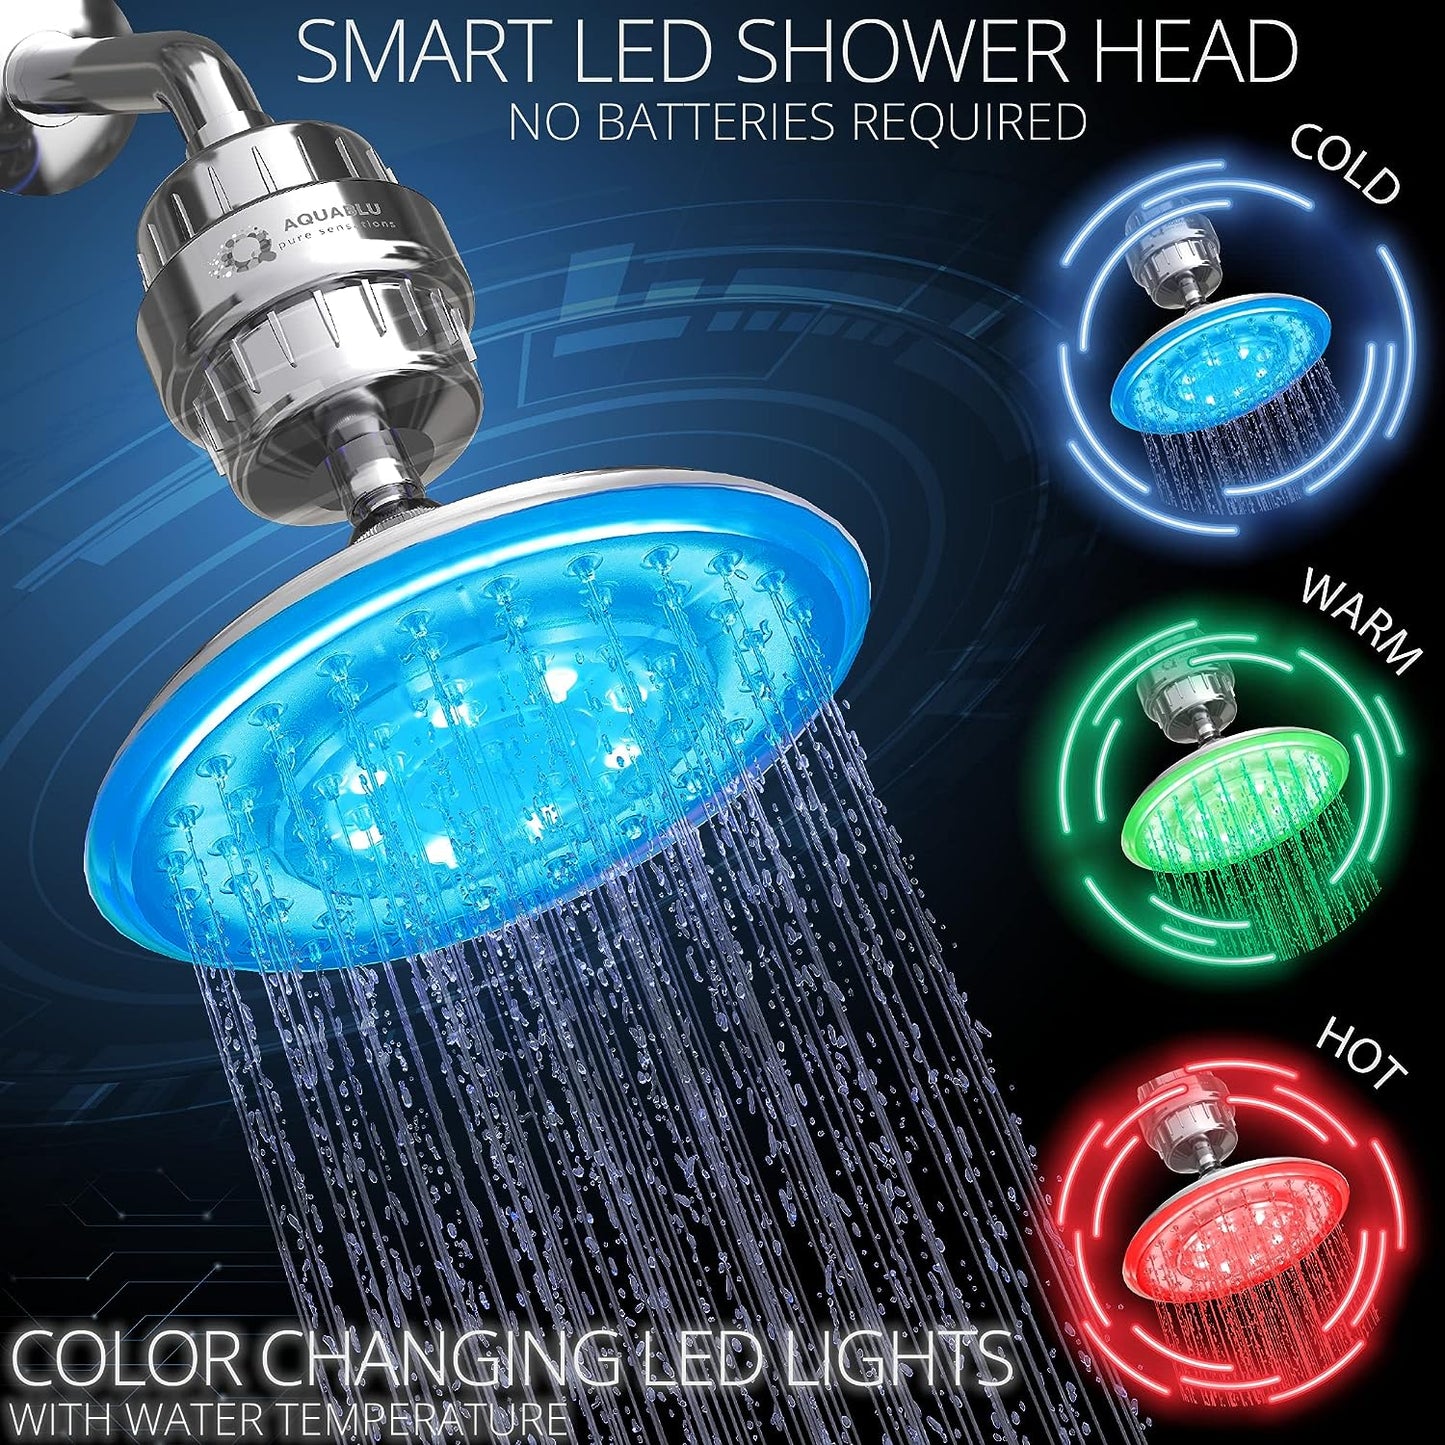 Shower Head - Color Changing LED, Large 8” with High-Pressure & Heavy Duty Shower Filter, Filtered Shower Head for Hard Water, Heavy Metals, Chlorine & More